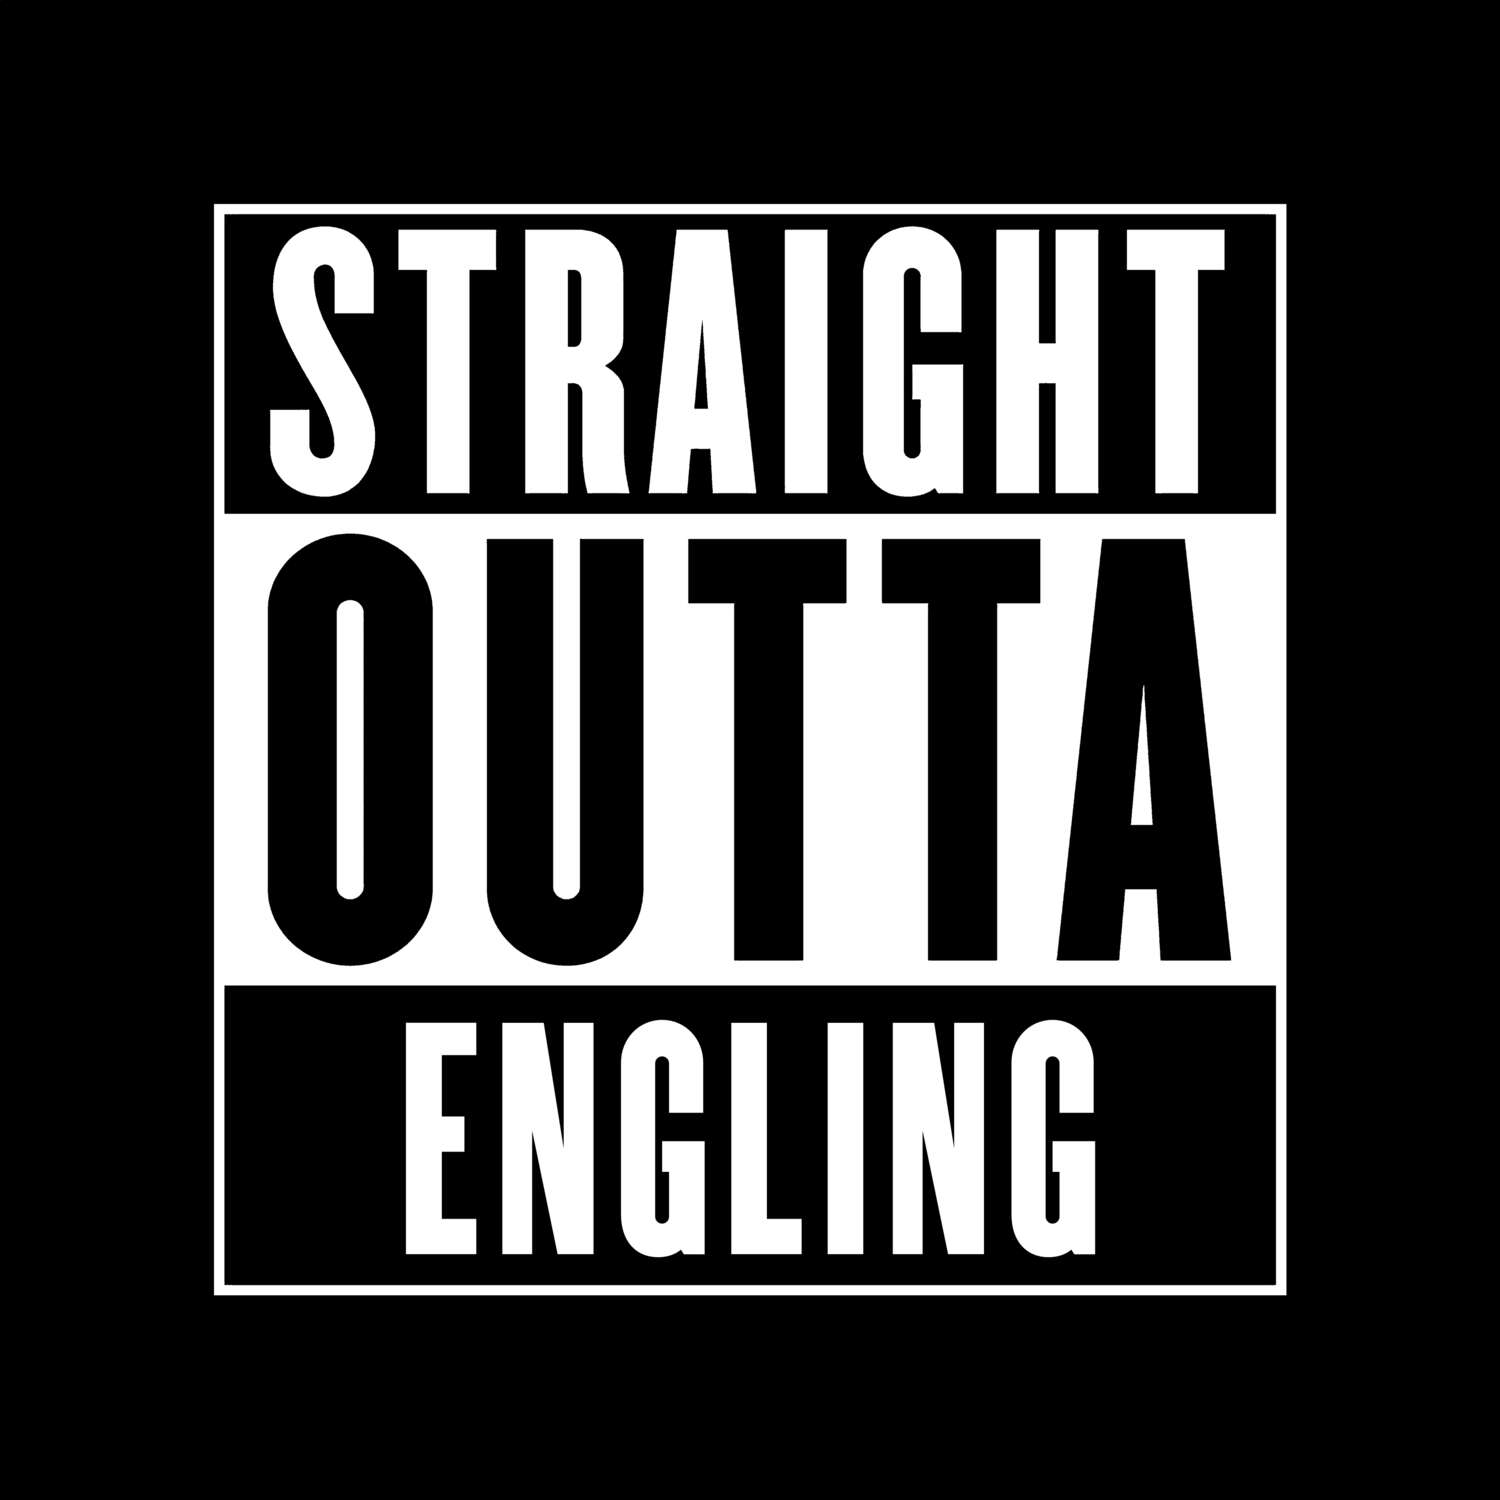 Engling T-Shirt »Straight Outta«